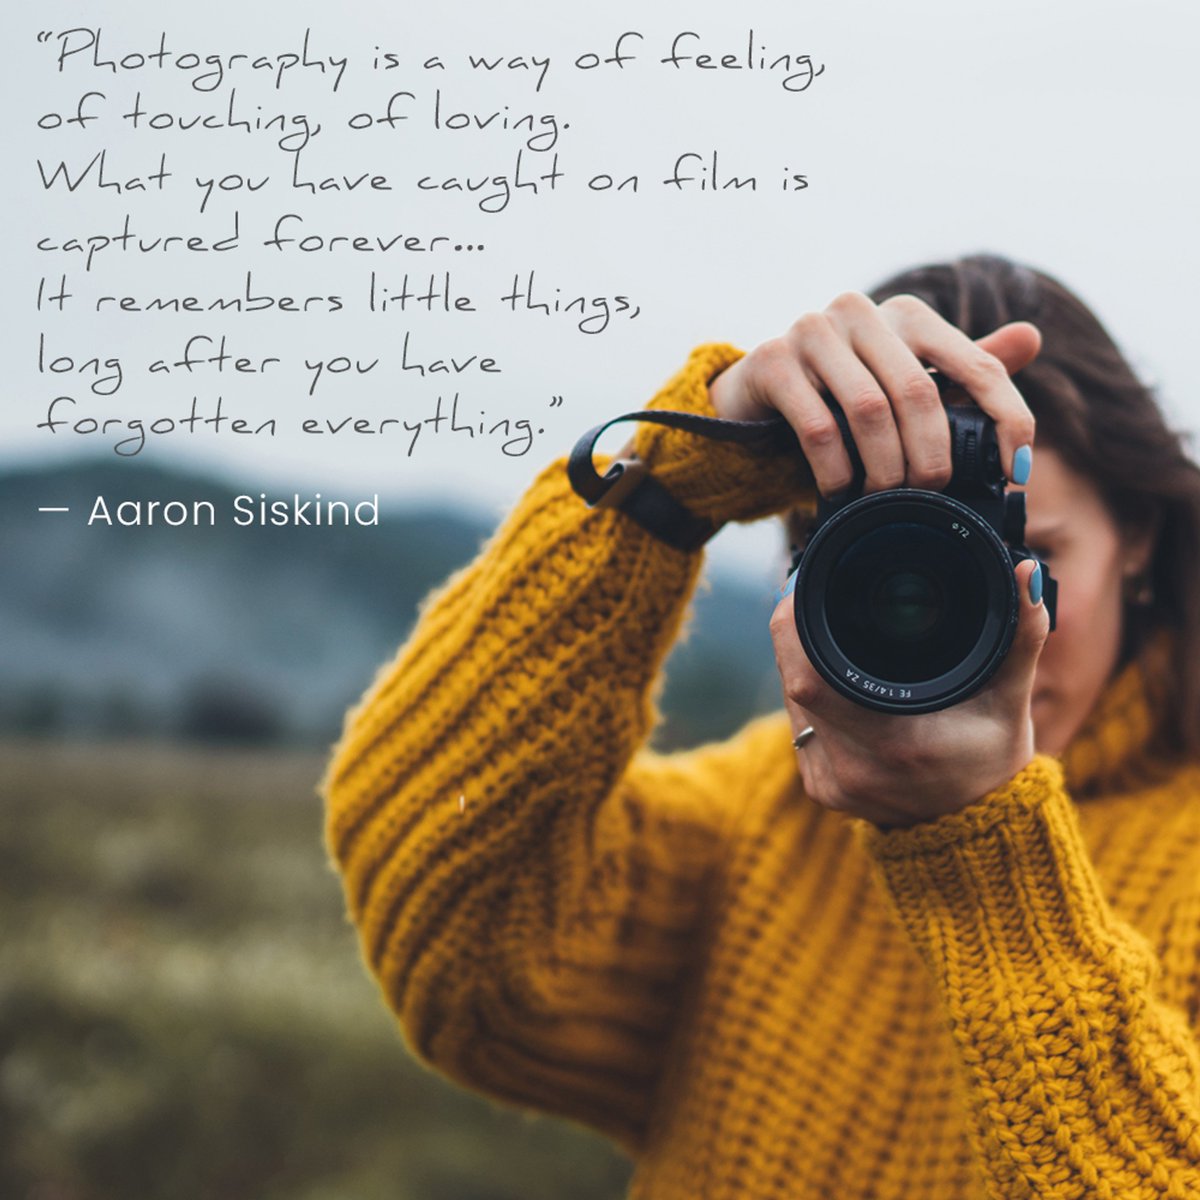 They say a picture is worth a thousand words. This quote sums up those words.

#photography #quotes #inspiration